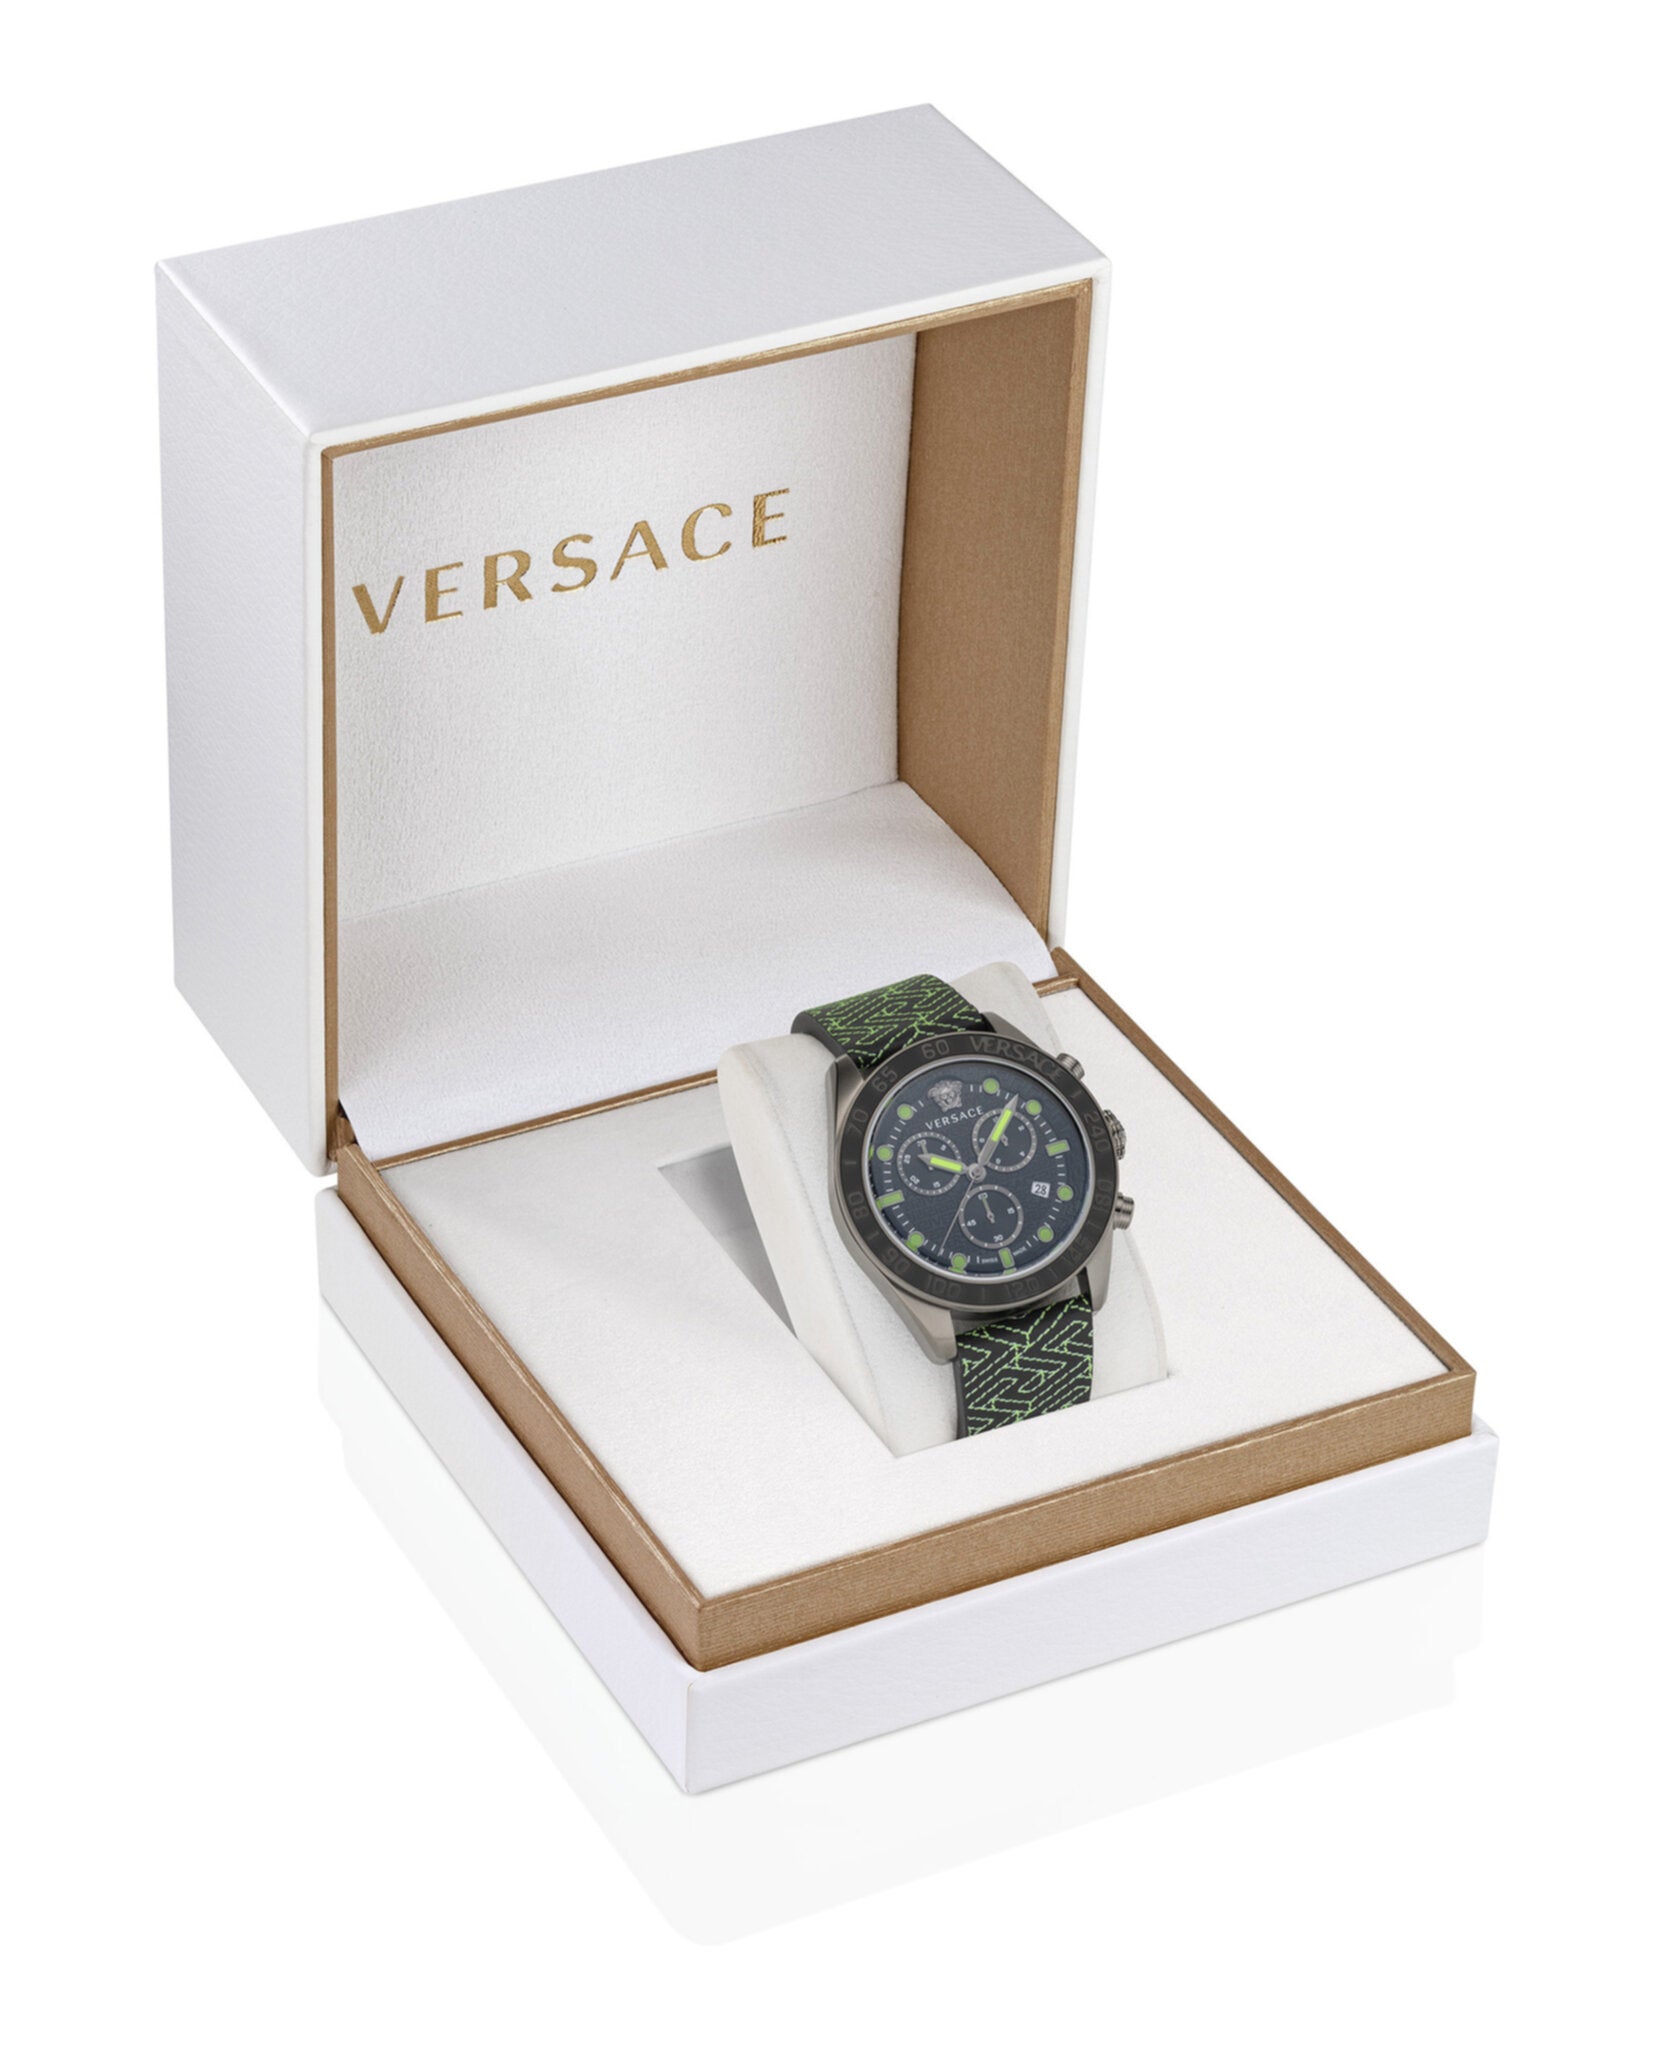 Dome MadaLuxe – | Mens Time Madaluxe Watches Versace Greca Time